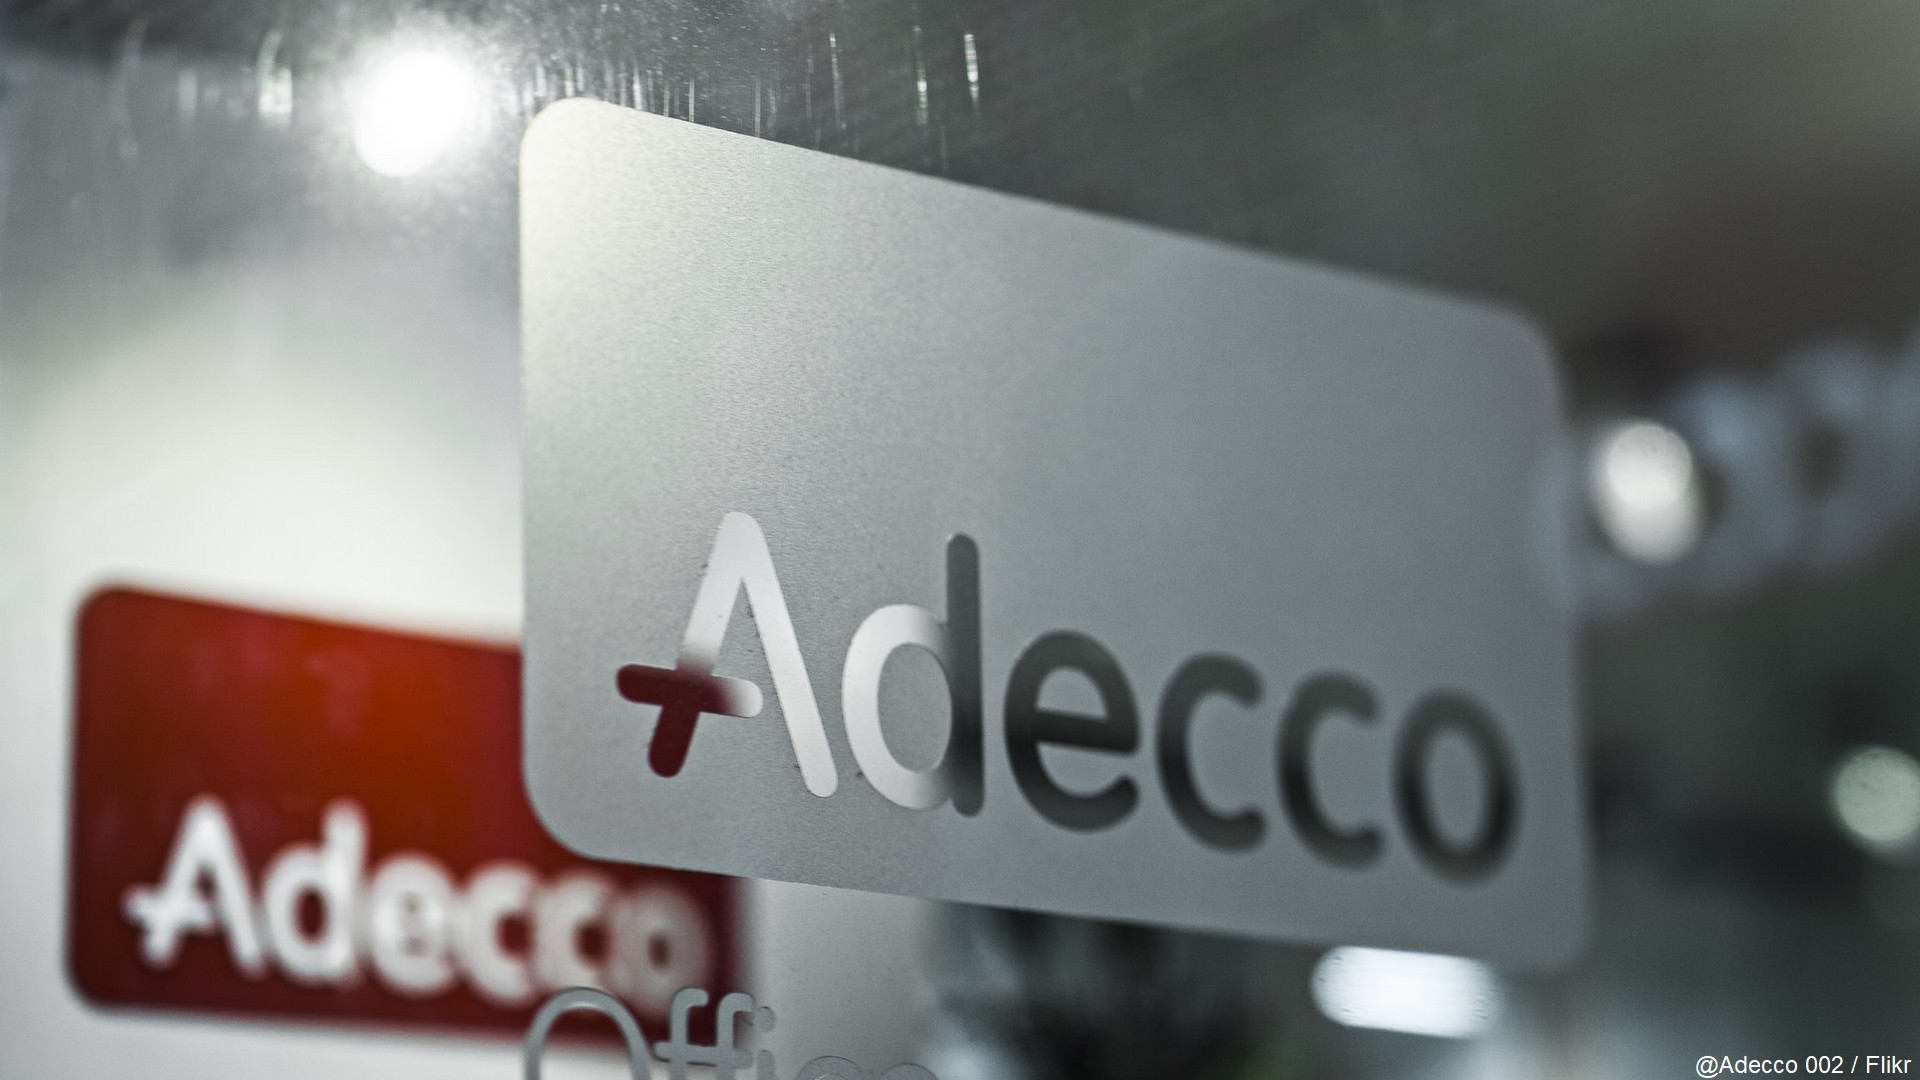 Feedback from Adecco | Sofia Investment AgencySofia Investment Agency